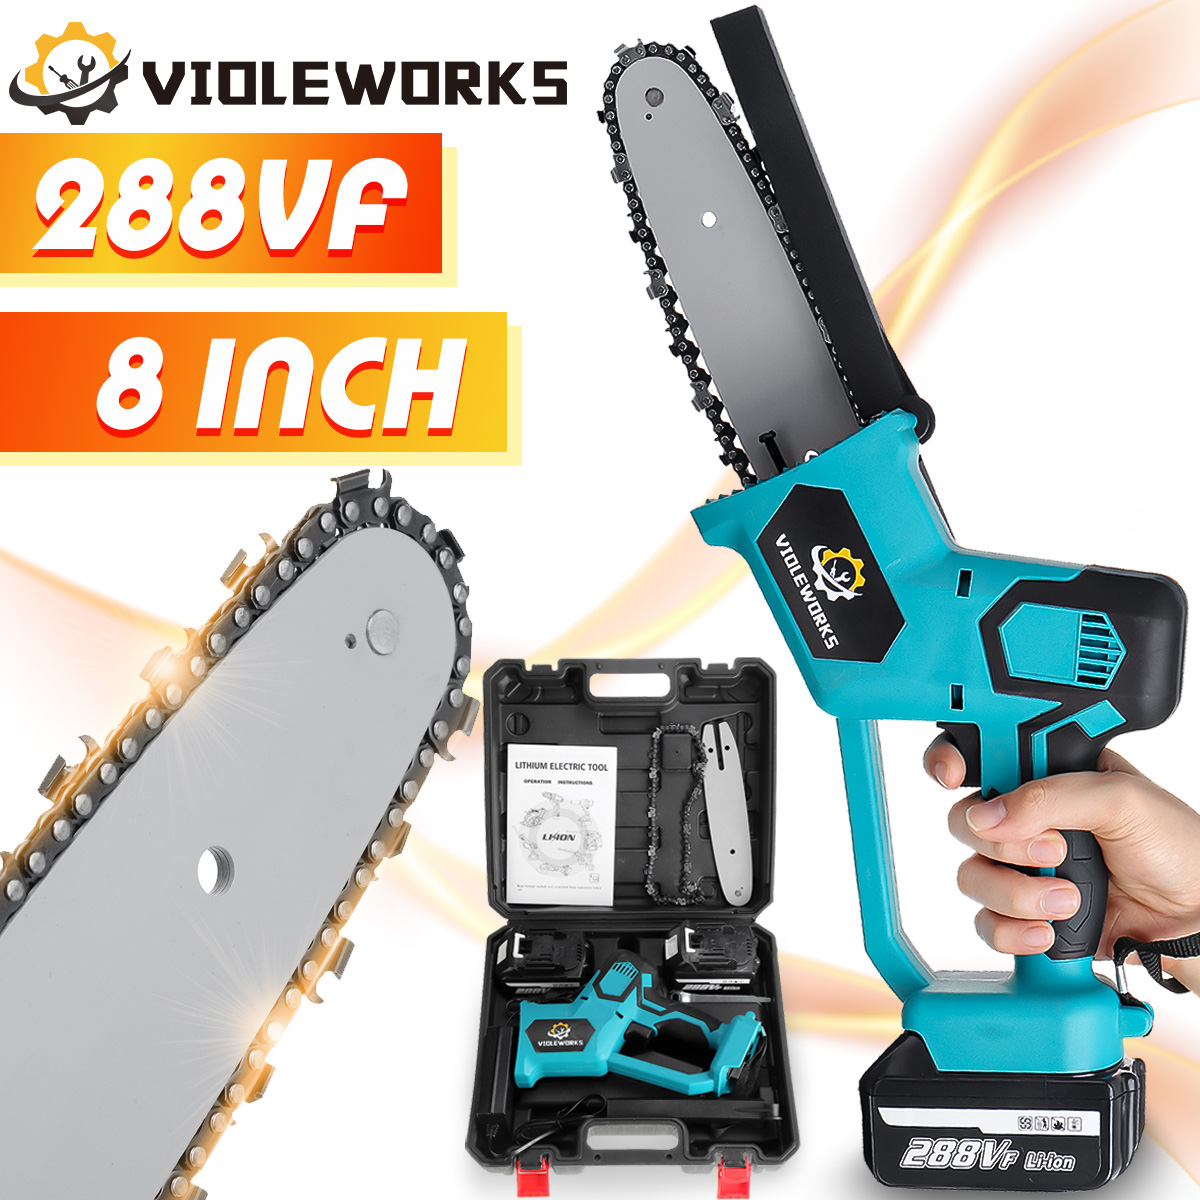 288VF-8Inch-Cordless-Electric-Chainsaws-One-Hand-Saw-Chain-Saw-Woodworking-Tool-W-12pcs-Battery-1835929-1